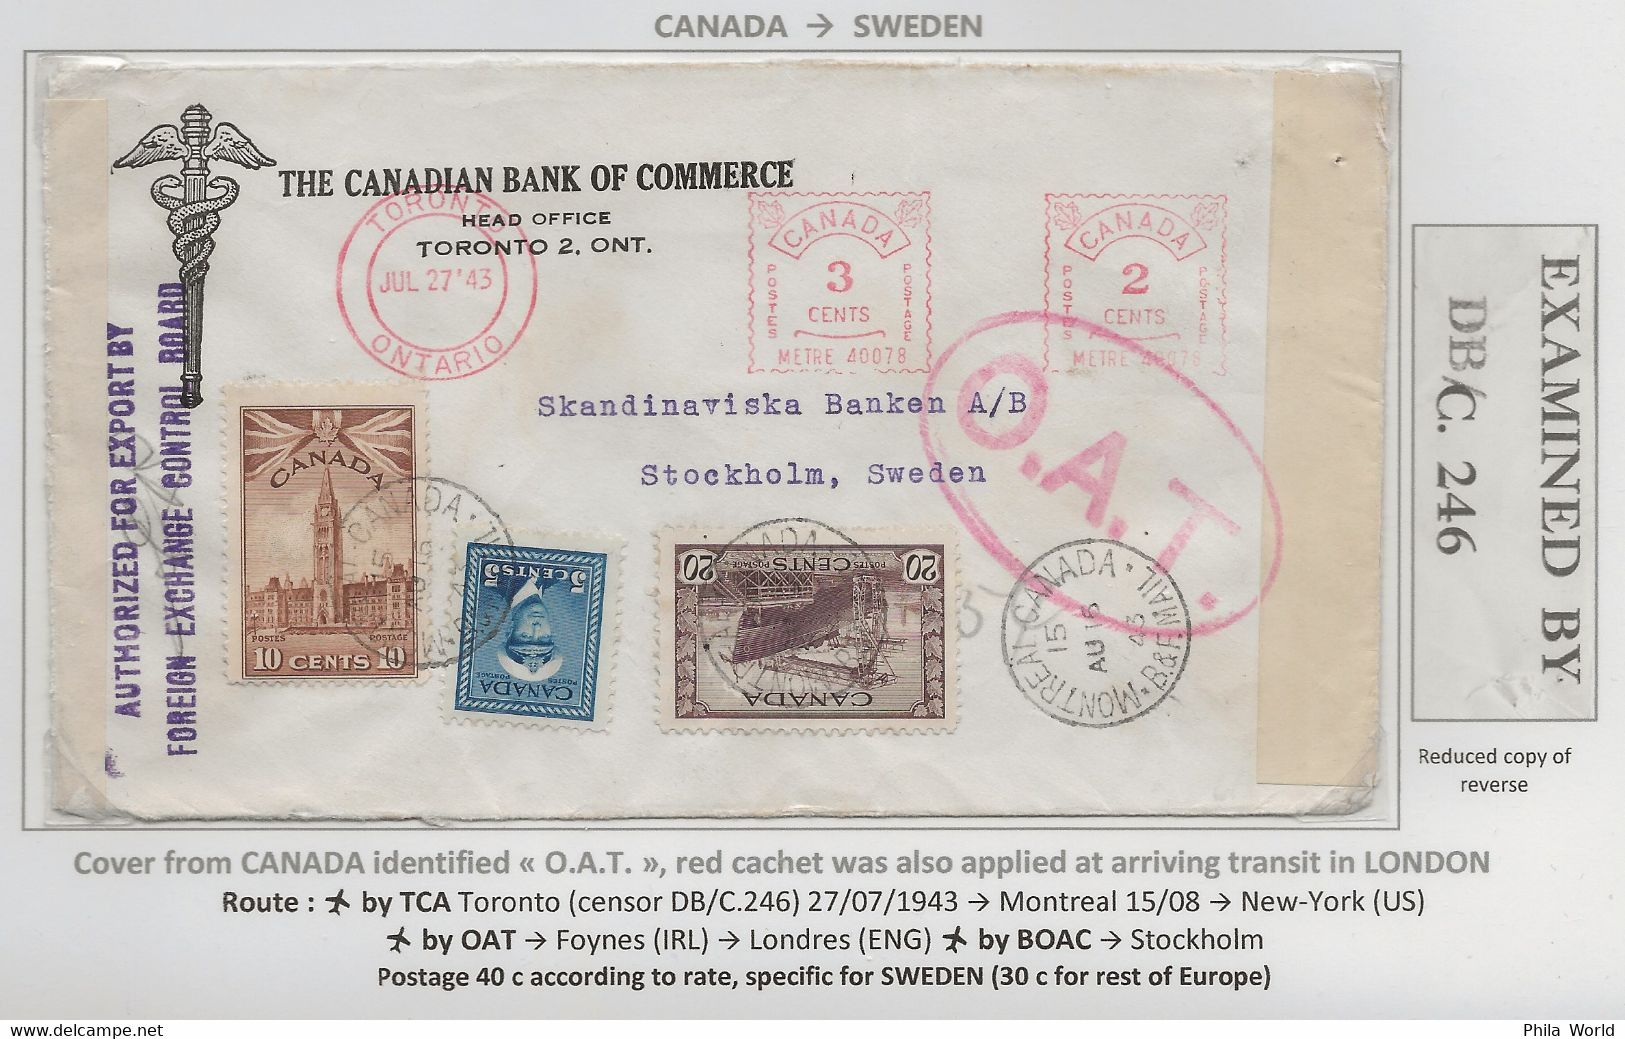 OAT 1943 CANADA Meter Postage EMA Air Mail Cover > SWEDEN US Censor EXAMINED DB/C 246 Censortape From TORONTO - Cartas & Documentos